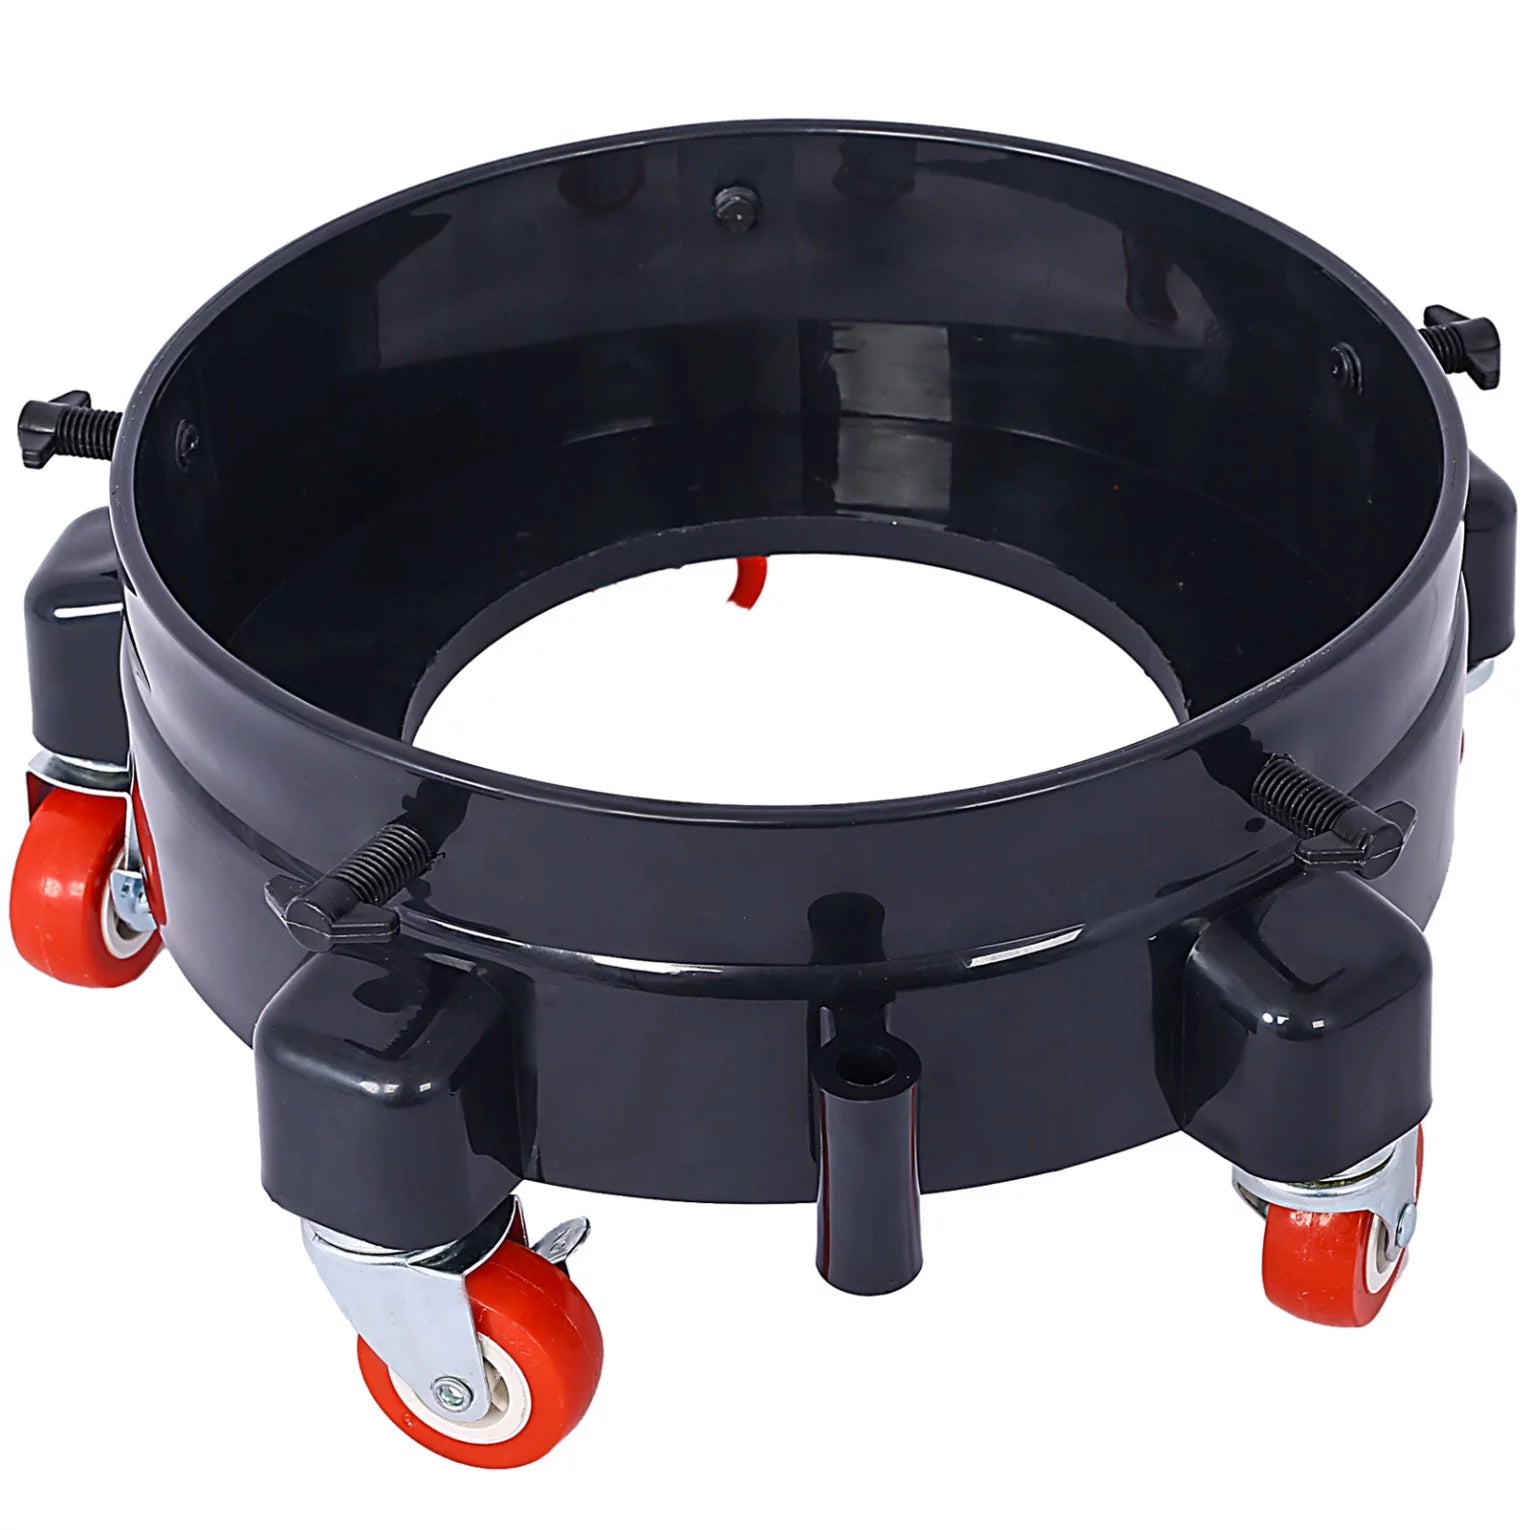 11.2" Bucket Dolly, Removable Rolling Bucket Dolly, Easy Push 5 Roll Swivel Casters to Move 360 Degree Turning for 5 Gallon Buckets Car Wash System,Black